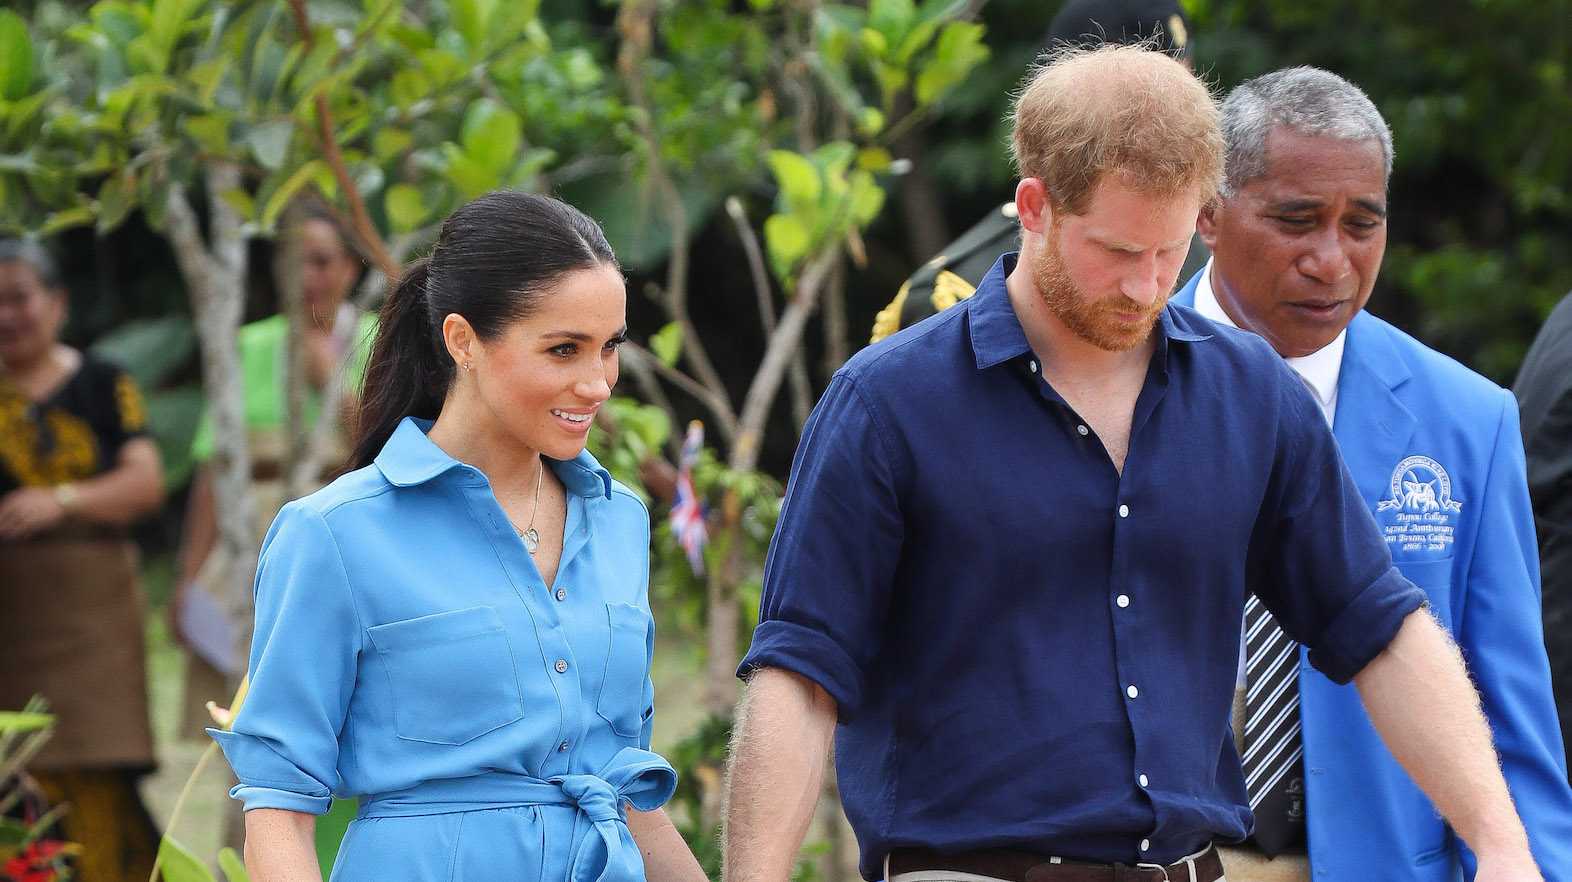 Dropping Hints? Meghan Markle Wore a Lot of Blue During Pregnancy ...